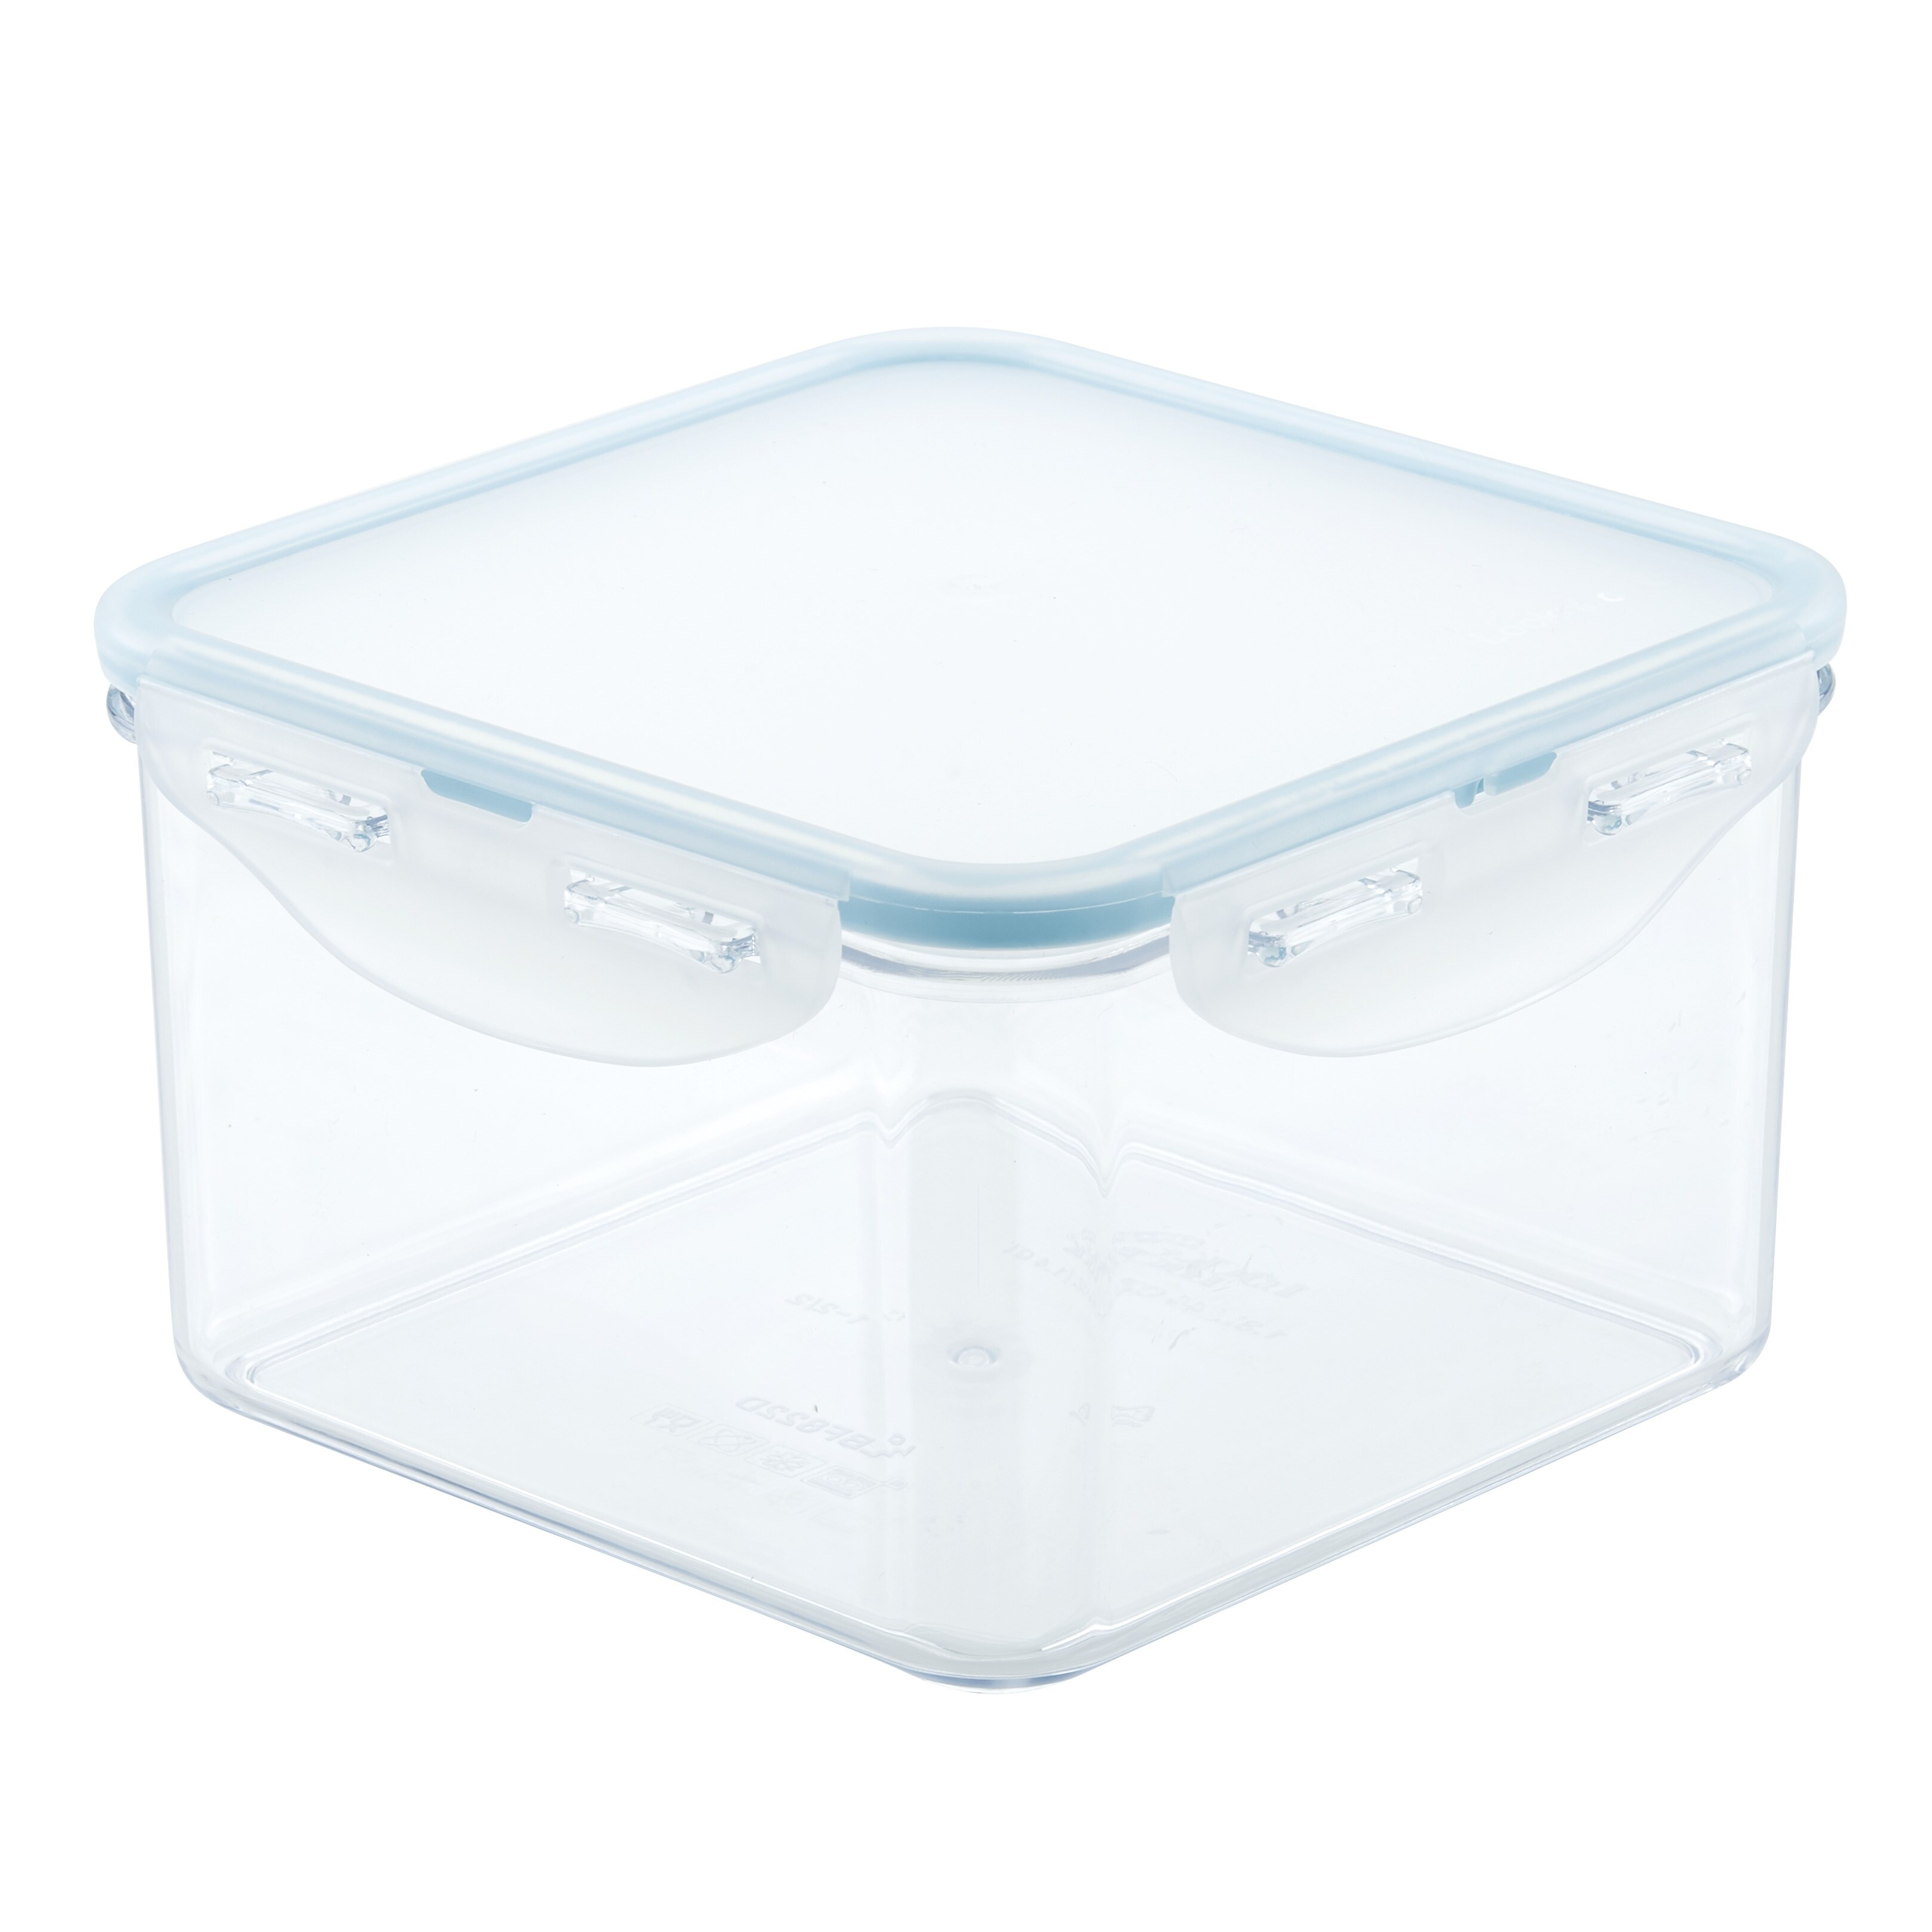 https://ak1.ostkcdn.com/images/products/is/images/direct/fcec196c371e41a4a84da81a5983ac61f429a547/LocknLock-Purely-Better-Square-Food-Storage-Containers%2C-44-Ounce%2C-Set-of-2.jpg